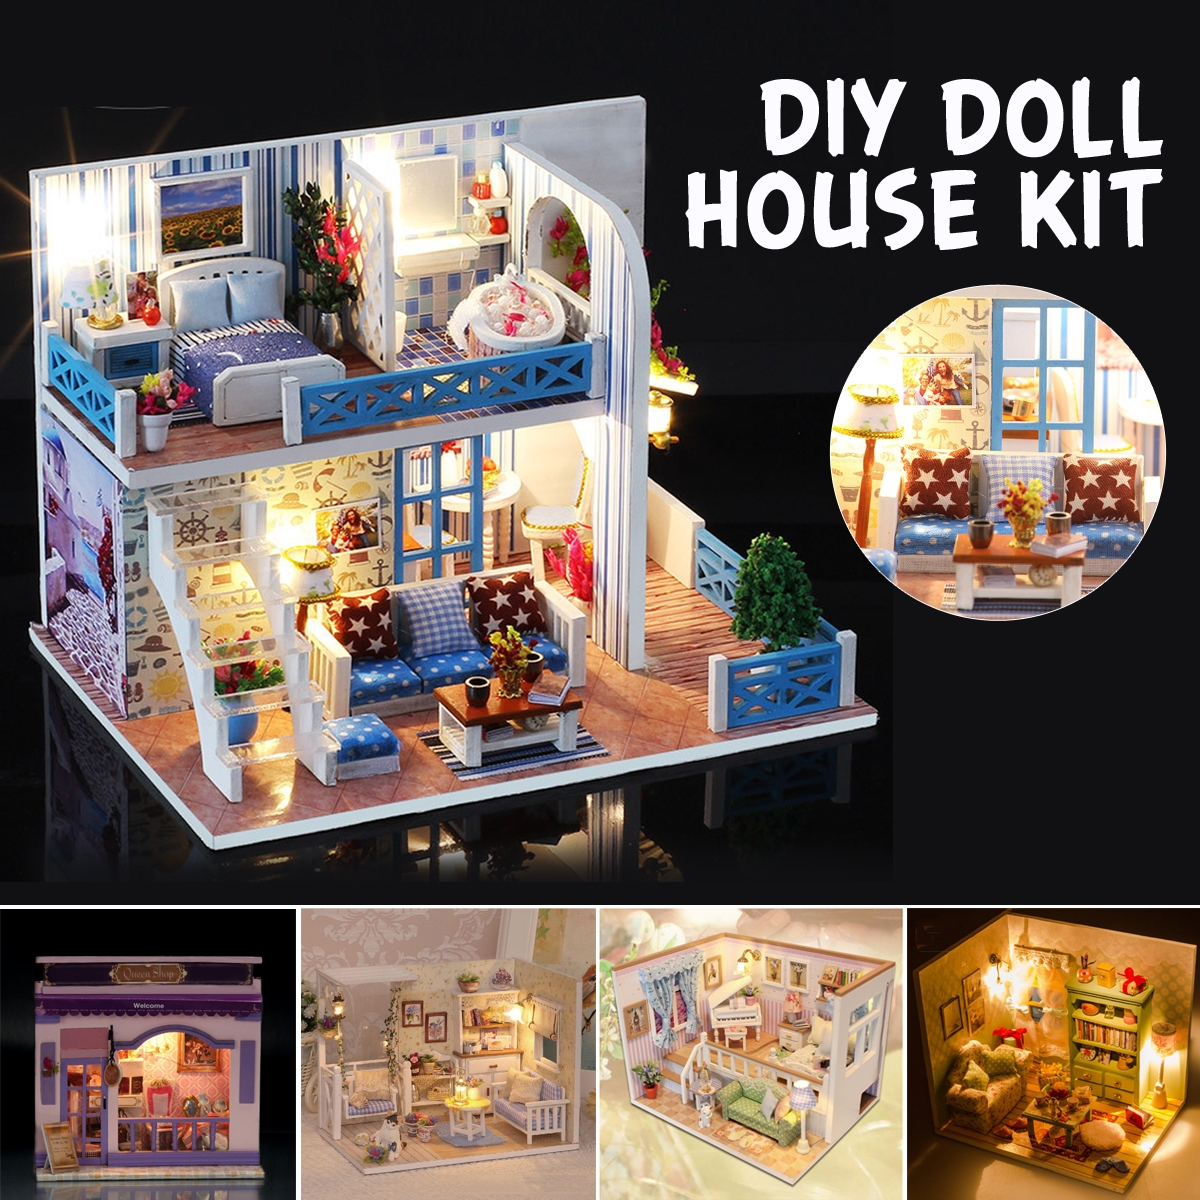 Wooden Multi-style 3D DIY Handmade Assemble Doll House Miniature Kit with Furniture LED Light Education Toy for Kids Gift Collection